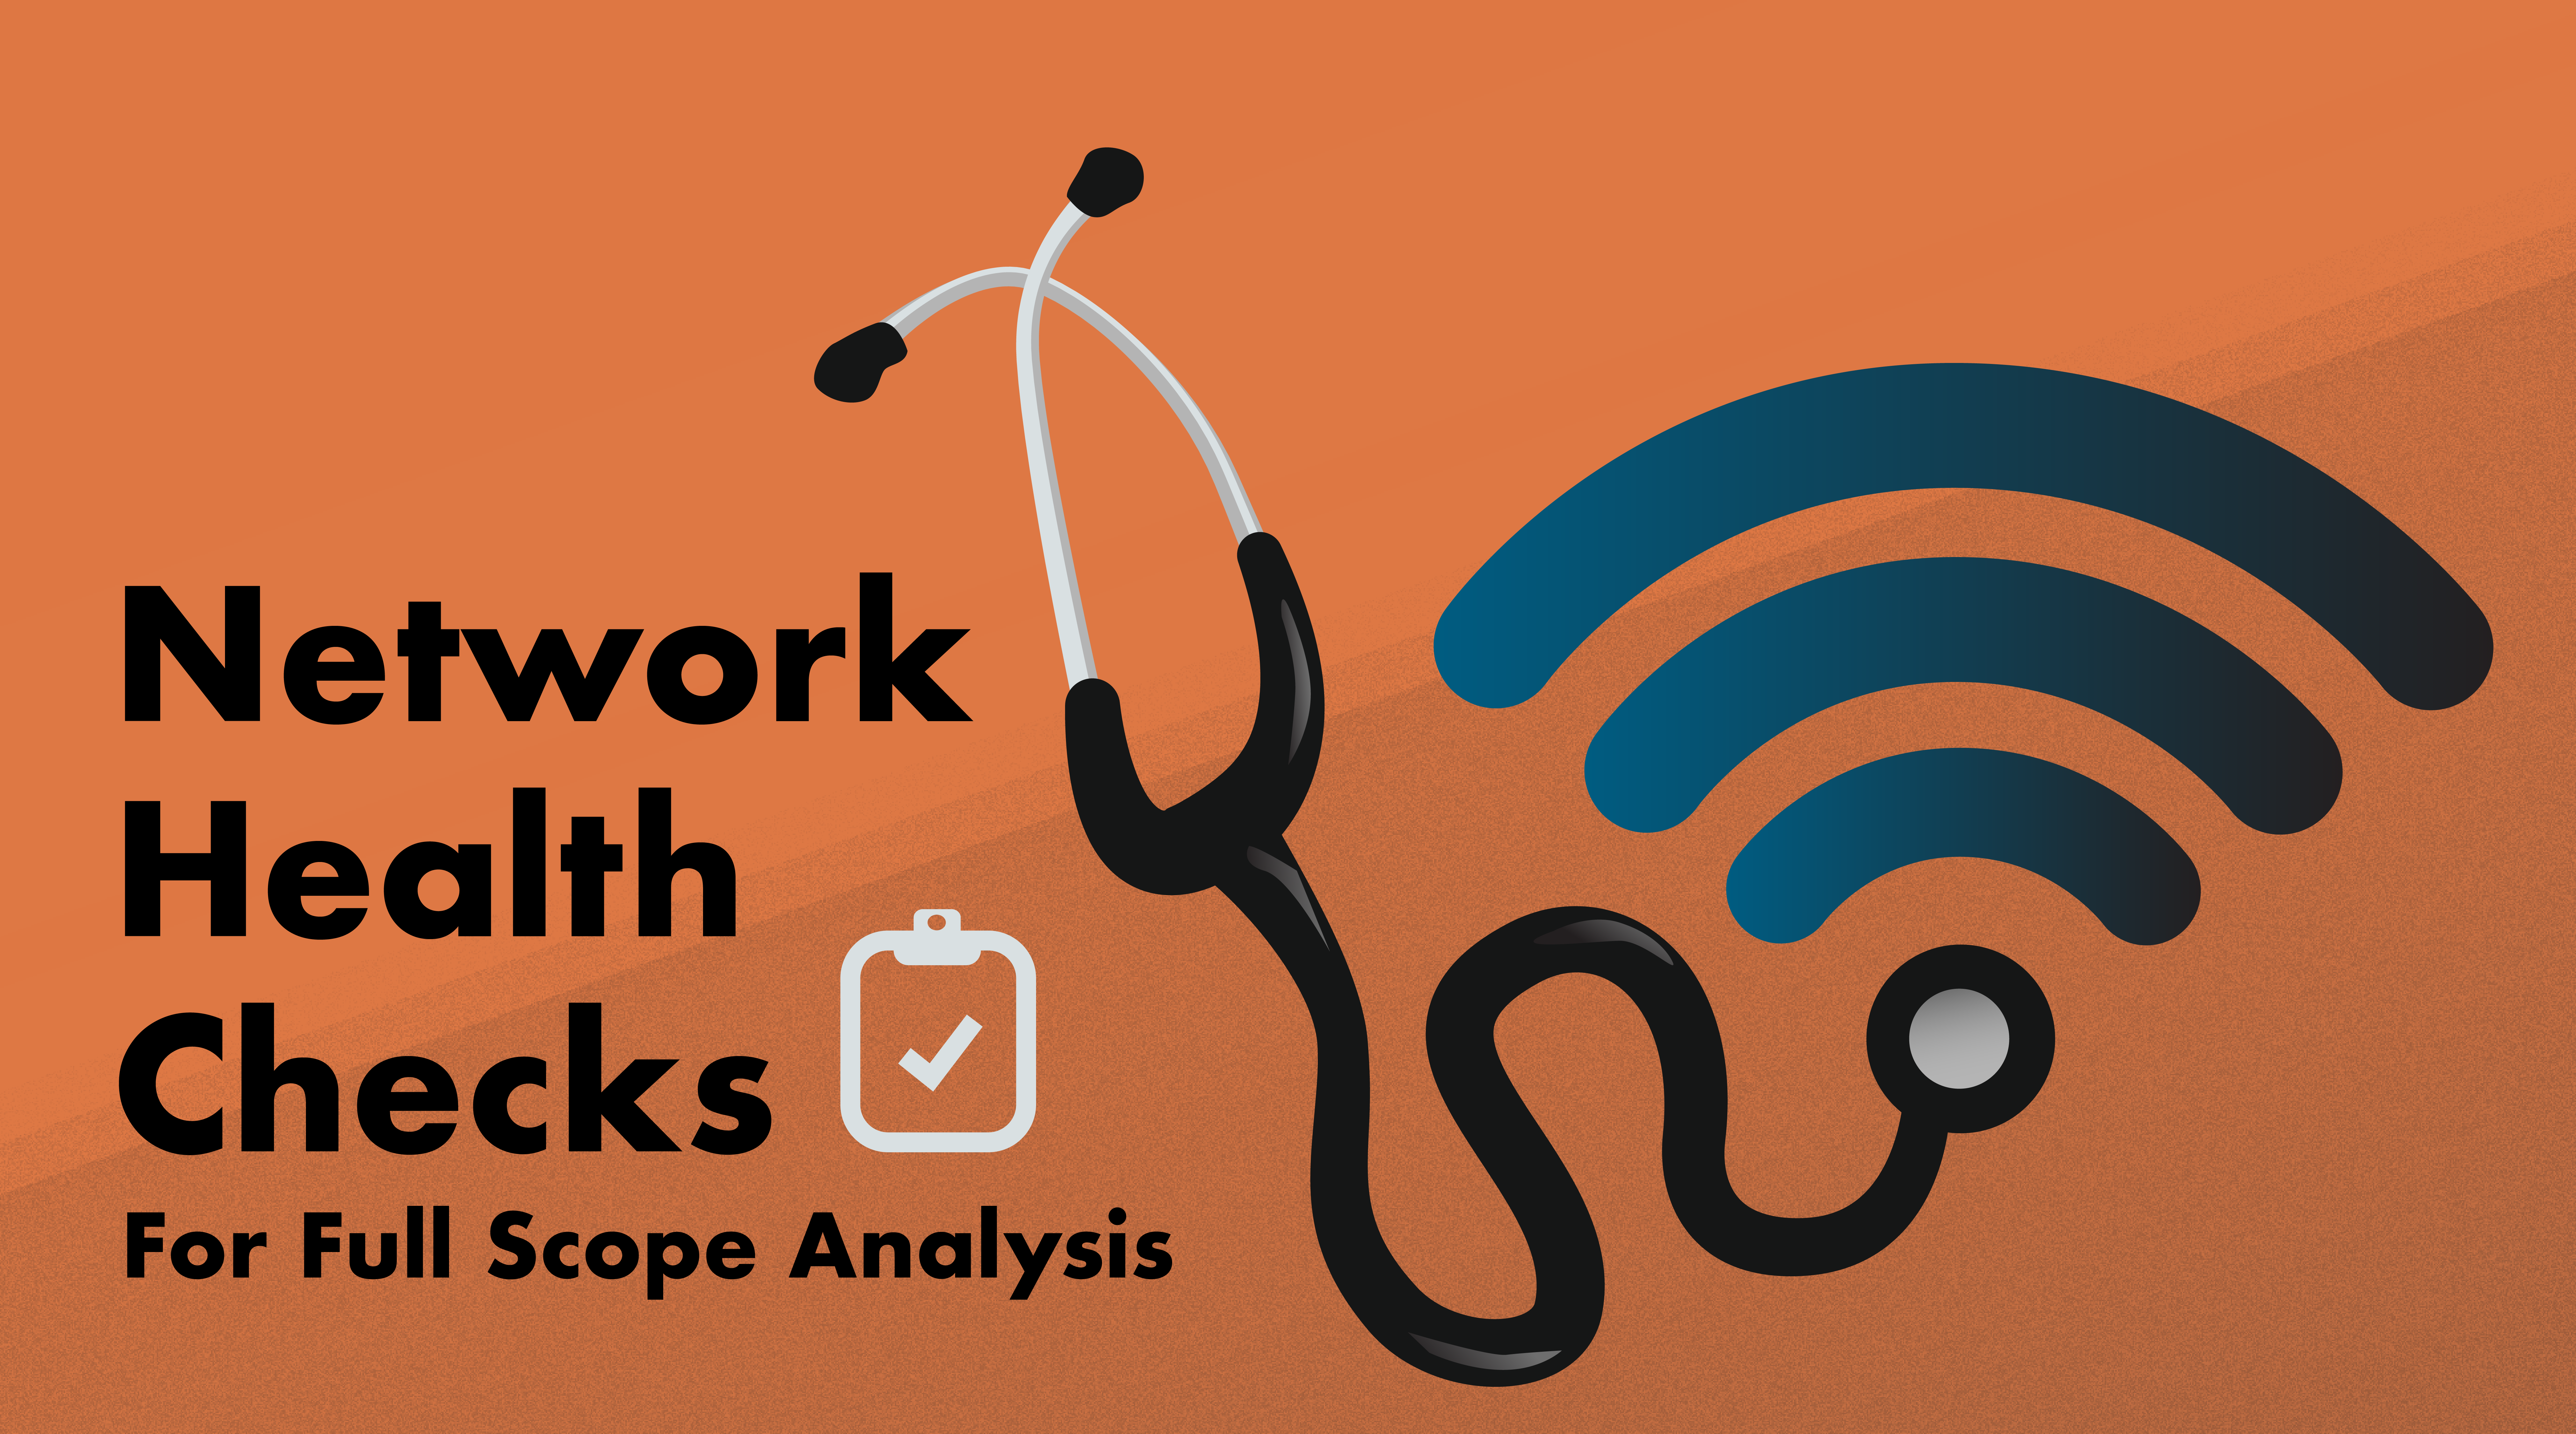 Network_Health_Checks_Blog_Cover-01.png